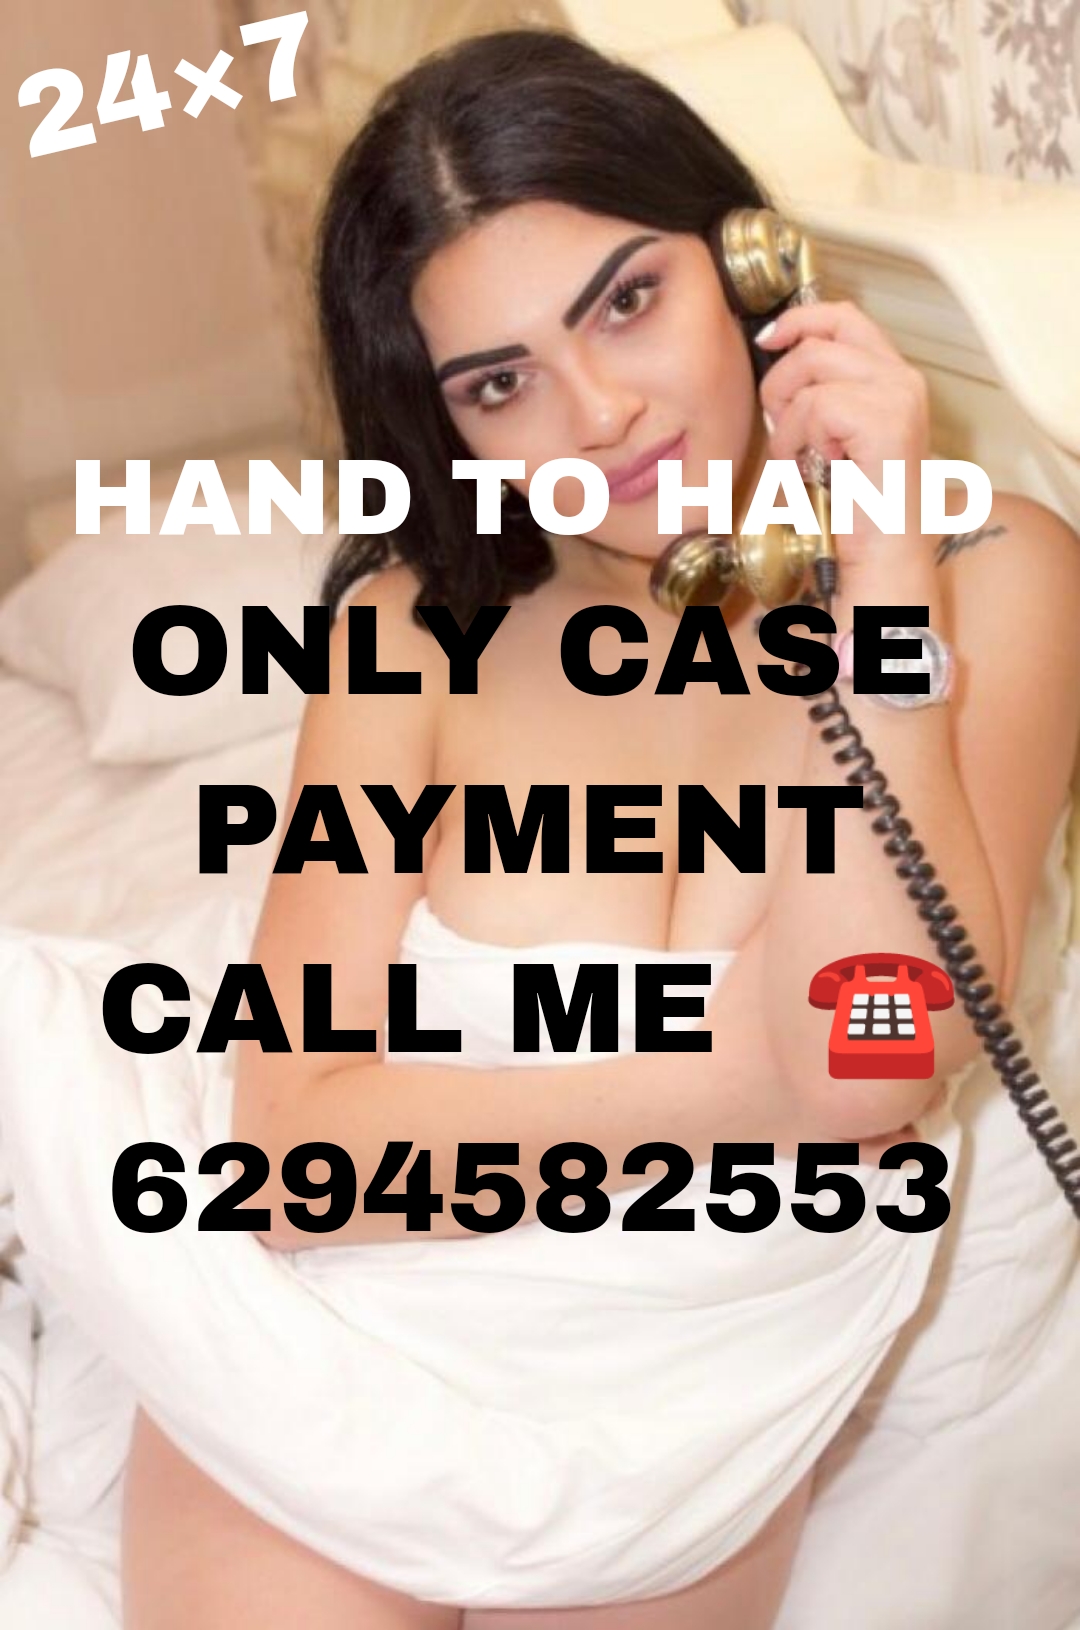 Thane Call girls & Thane Call girl Service are available in affordable